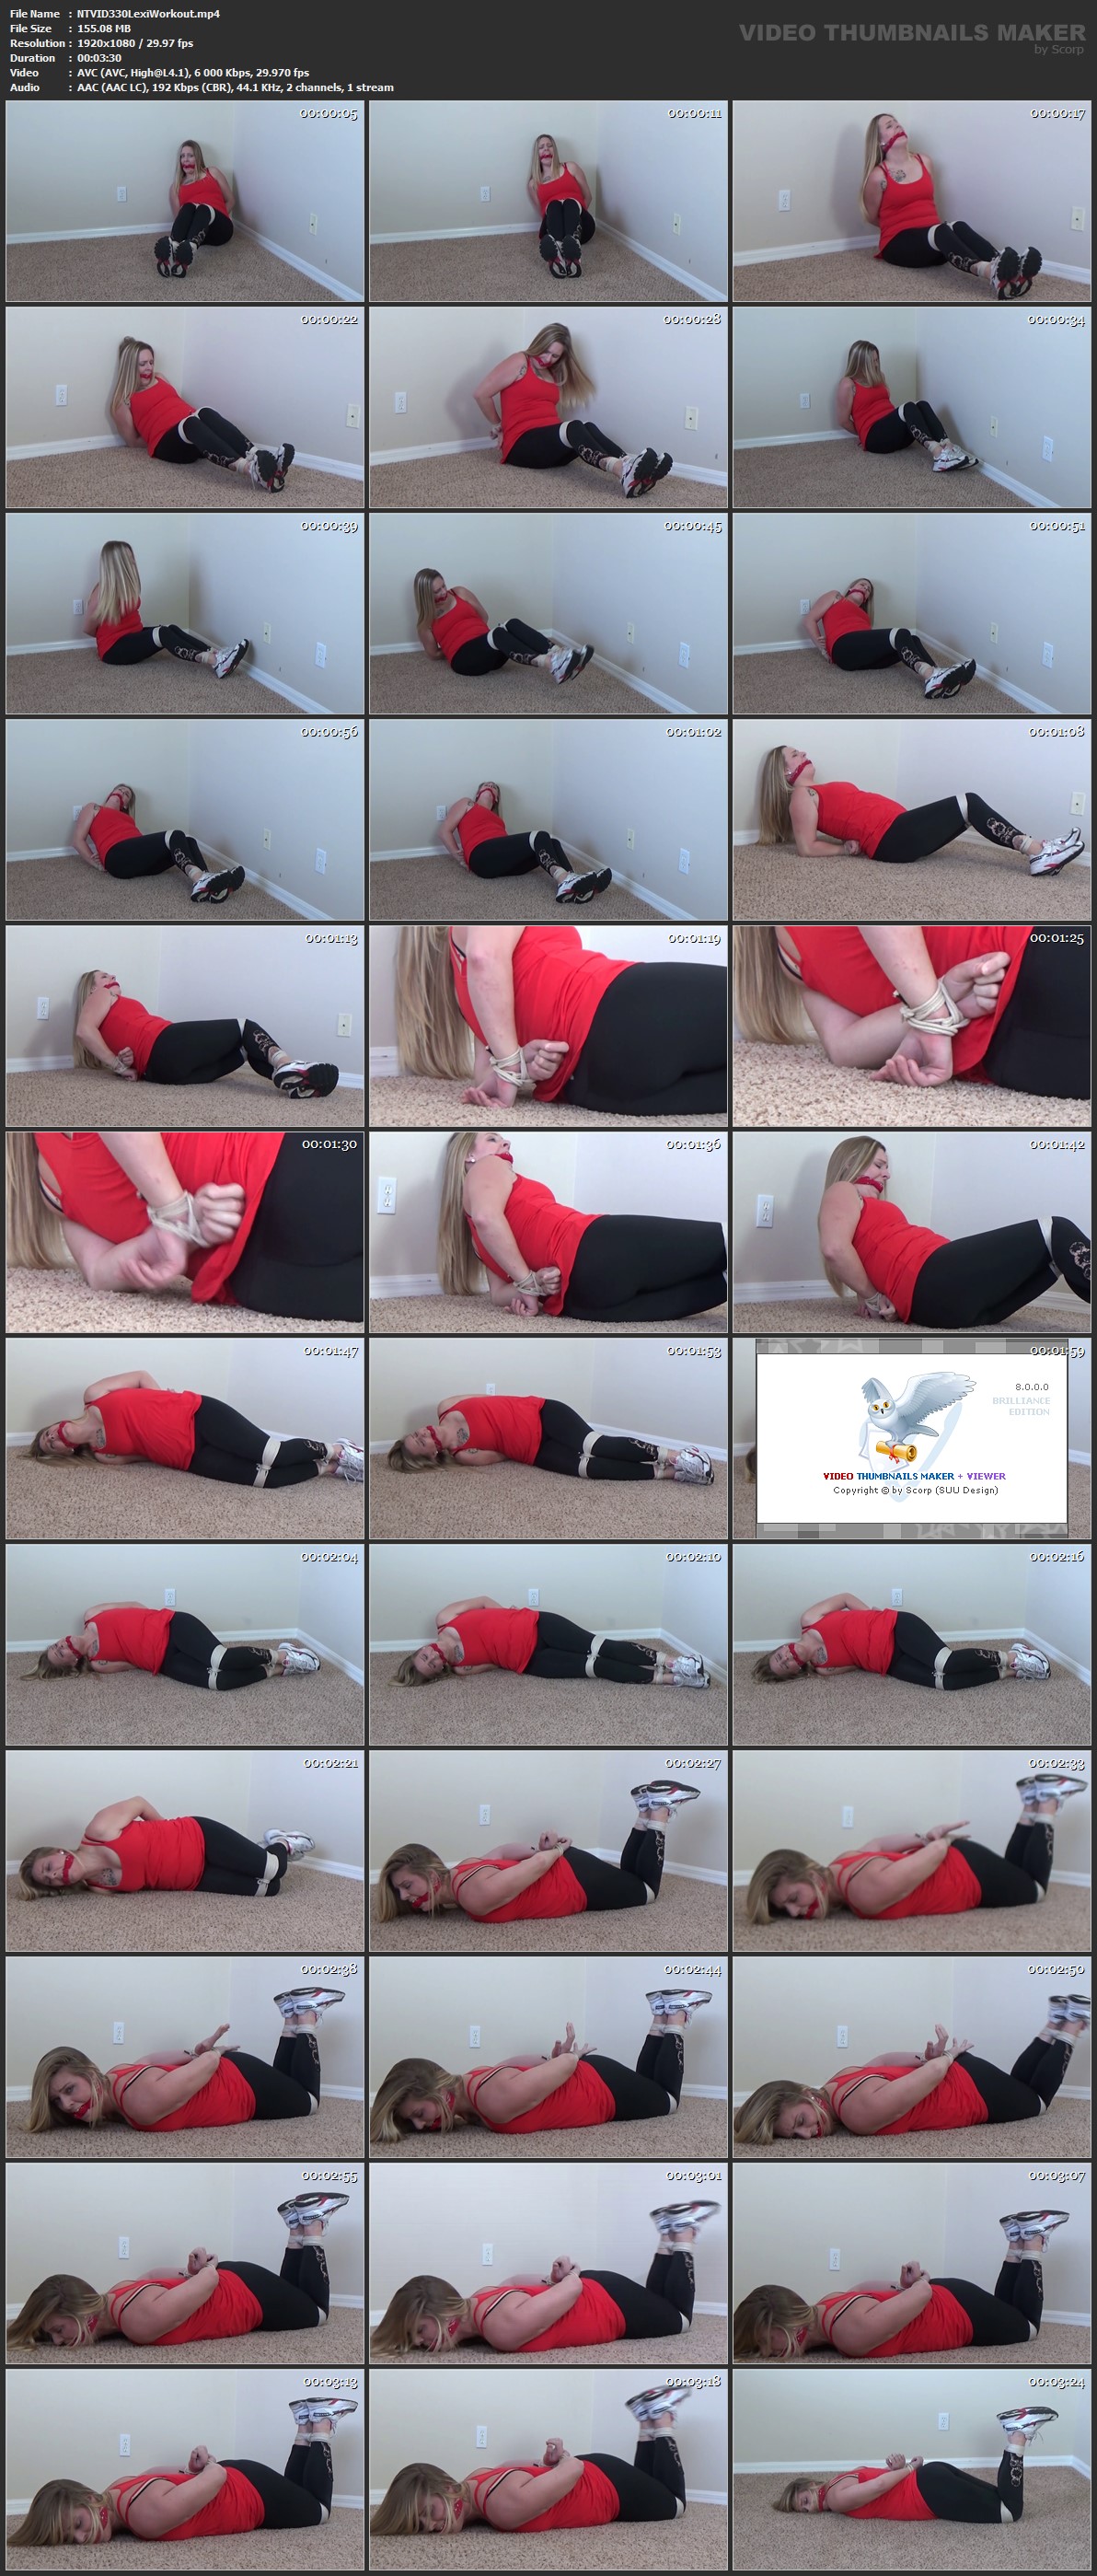 NTVID 330 Lexi Workout mp 4